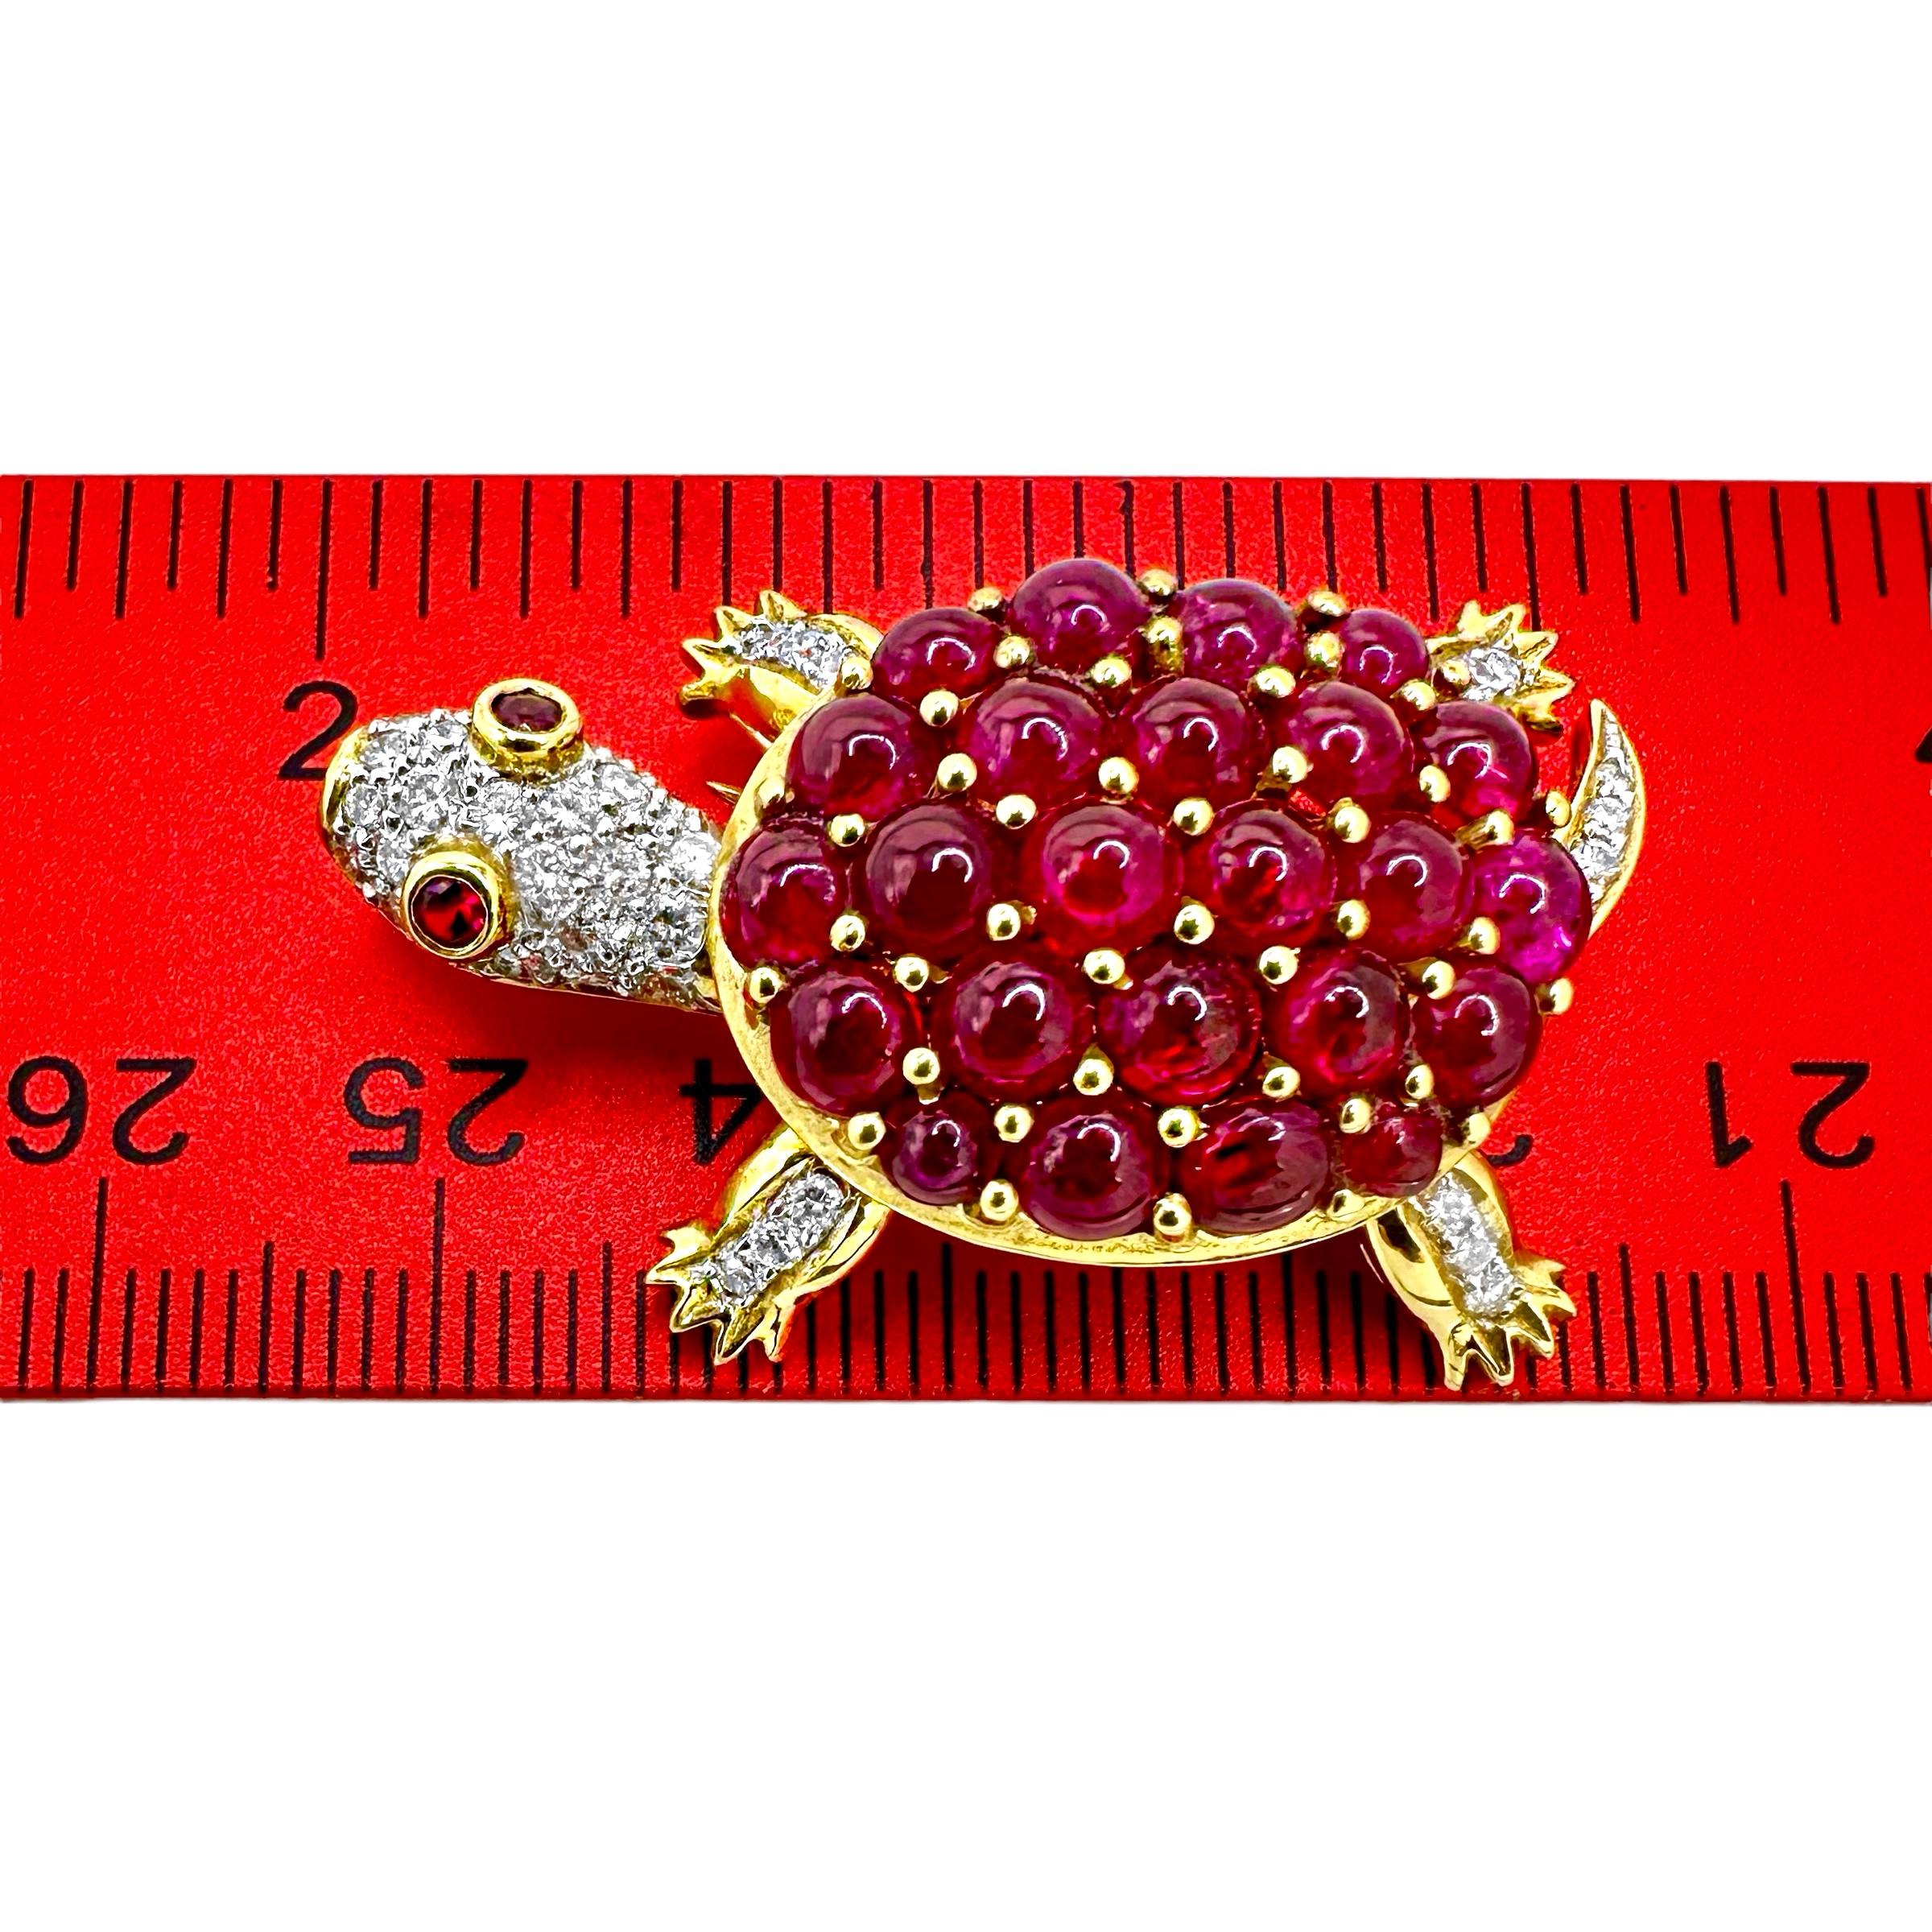 Adorable Turtle Brooch/Pendant with Motion in 18K Gold, Diamonds, and Rubies For Sale 11